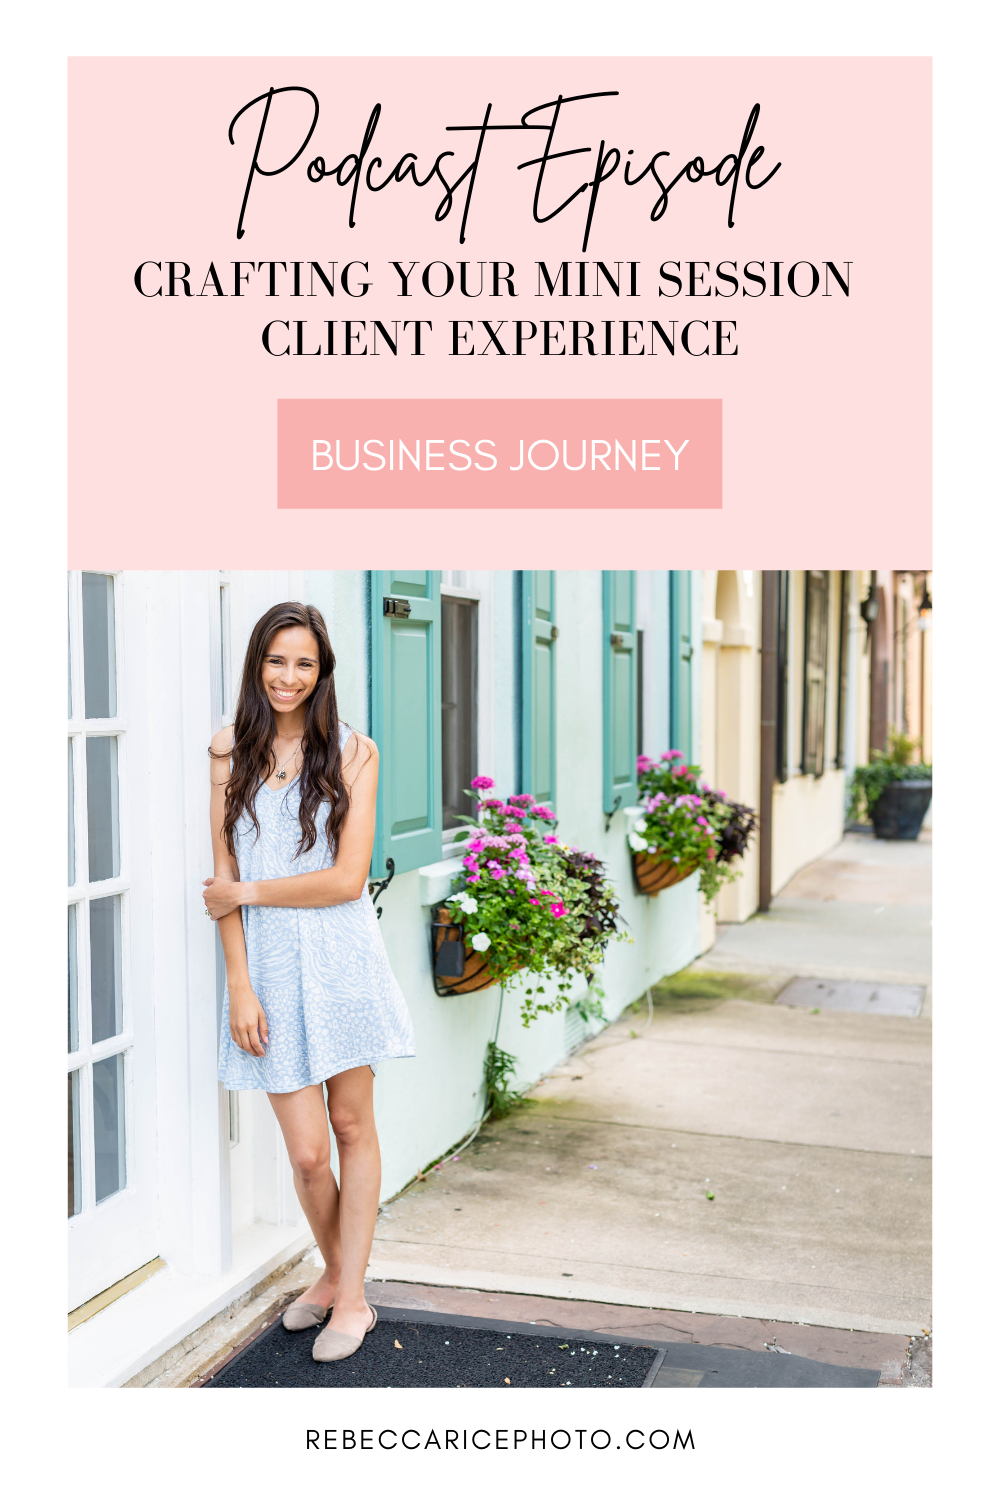 Crafting Your Mini Session Client Experience | Client Experience Tips